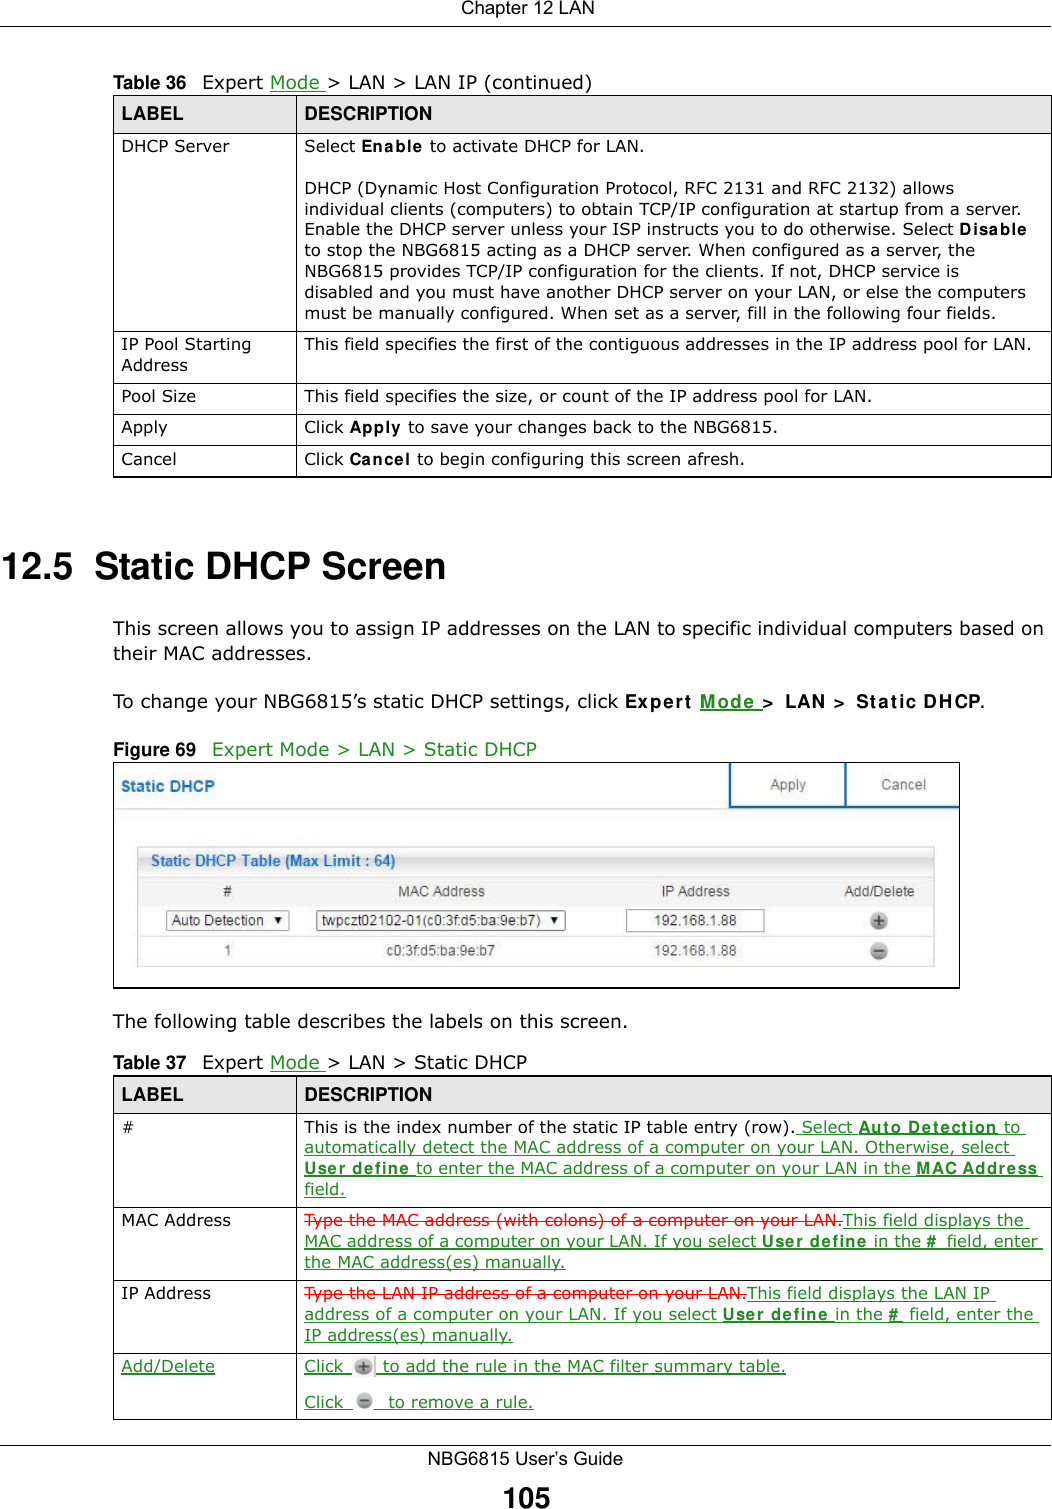  Chapter 12 LANNBG6815 User’s Guide10512.5  Static DHCP ScreenThis screen allows you to assign IP addresses on the LAN to specific individual computers based on their MAC addresses. To change your NBG6815’s static DHCP settings, click Expert Mode &gt; LAN &gt; Static DHCP.Figure 69   Expert Mode &gt; LAN &gt; Static DHCP The following table describes the labels on this screen.DHCP Server Select Enable to activate DHCP for LAN.DHCP (Dynamic Host Configuration Protocol, RFC 2131 and RFC 2132) allows individual clients (computers) to obtain TCP/IP configuration at startup from a server. Enable the DHCP server unless your ISP instructs you to do otherwise. Select Disable to stop the NBG6815 acting as a DHCP server. When configured as a server, the NBG6815 provides TCP/IP configuration for the clients. If not, DHCP service is disabled and you must have another DHCP server on your LAN, or else the computers must be manually configured. When set as a server, fill in the following four fields.IP Pool Starting AddressThis field specifies the first of the contiguous addresses in the IP address pool for LAN.Pool Size This field specifies the size, or count of the IP address pool for LAN.Apply Click Apply to save your changes back to the NBG6815.Cancel Click Cancel to begin configuring this screen afresh.Table 36   Expert Mode &gt; LAN &gt; LAN IP (continued)LABEL DESCRIPTIONTable 37   Expert Mode &gt; LAN &gt; Static DHCP LABEL DESCRIPTION#This is the index number of the static IP table entry (row). Select Auto Detection to automatically detect the MAC address of a computer on your LAN. Otherwise, select User define to enter the MAC address of a computer on your LAN in the MAC Address field.MAC Address Type the MAC address (with colons) of a computer on your LAN.This field displays the MAC address of a computer on your LAN. If you select User define in the # field, enter the MAC address(es) manually.IP Address Type the LAN IP address of a computer on your LAN.This field displays the LAN IP address of a computer on your LAN. If you select User define in the # field, enter the IP address(es) manually.Add/Delete Click   to add the rule in the MAC filter summary table.Click   to remove a rule.